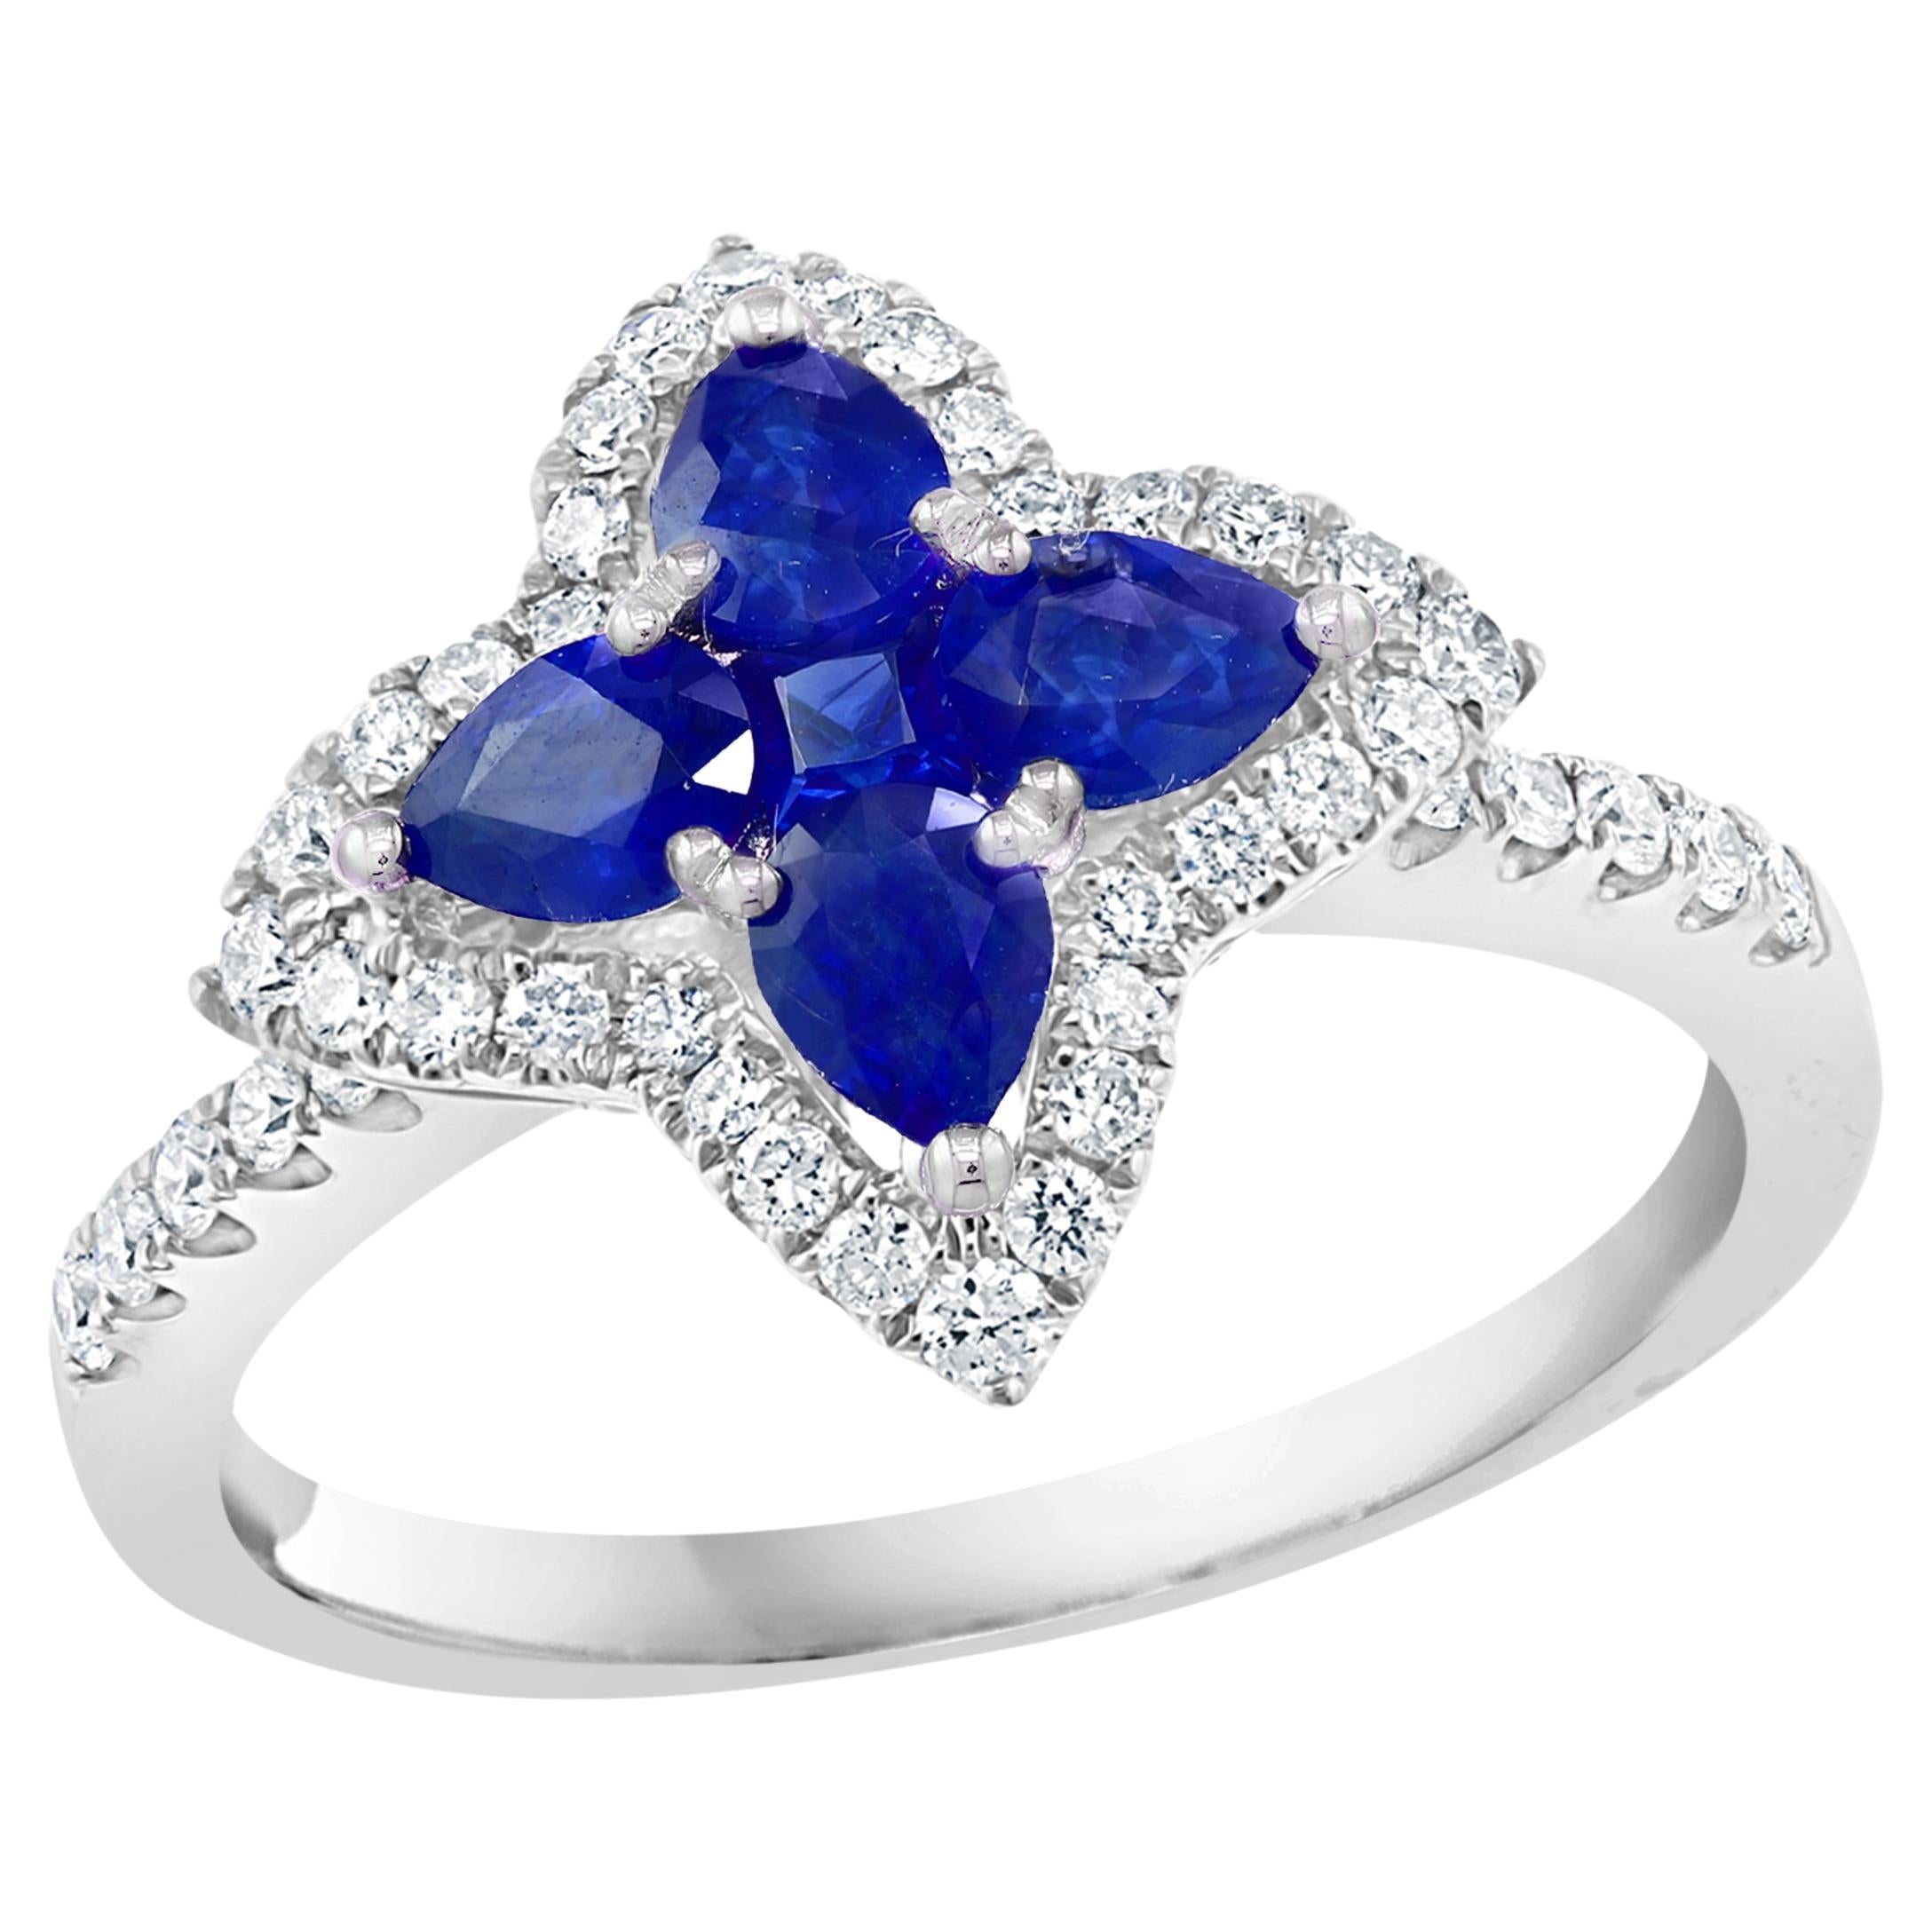 0.70 Carat Pear Shape Sapphire and Diamond Cocktail Ring in 18K White Gold For Sale